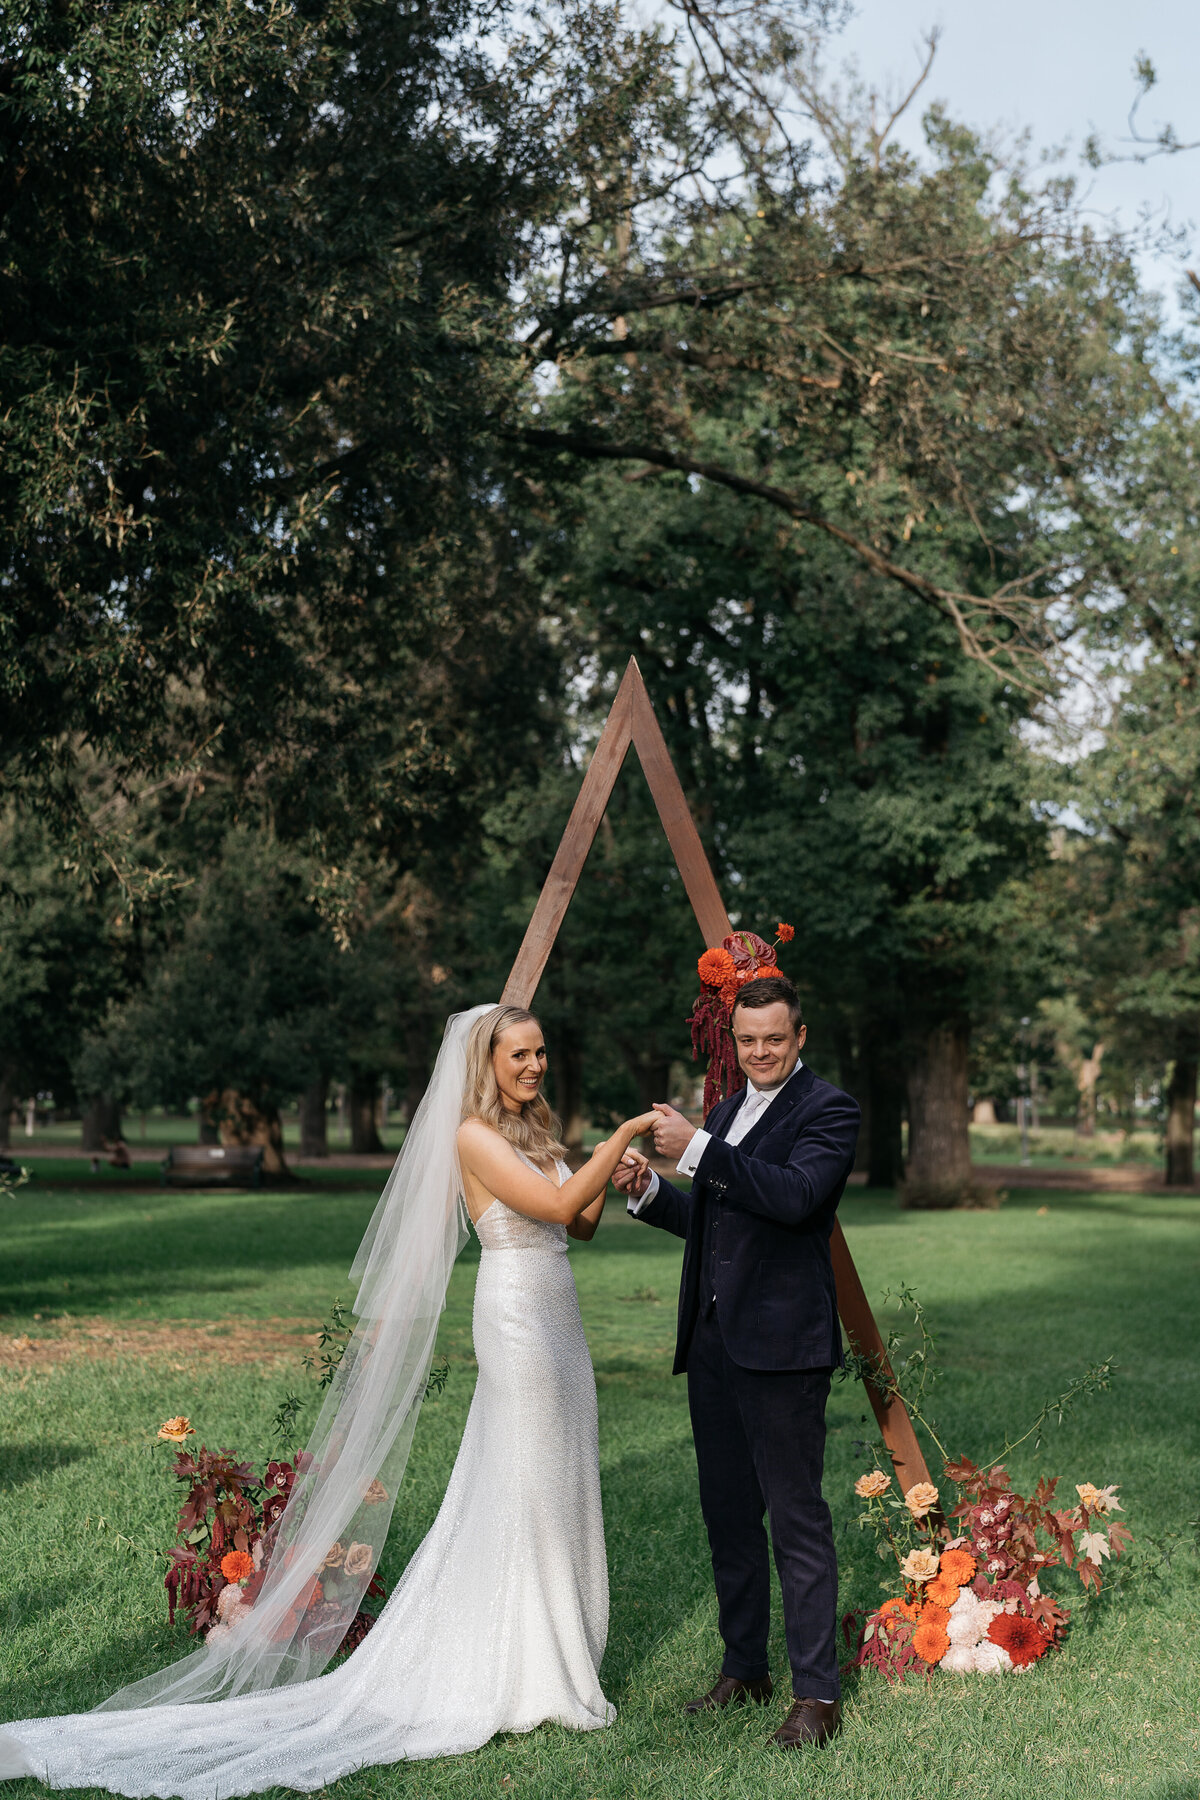 Courtney Laura Photography, Melbourne Wedding Photographer, Fitzroy Nth, 75 Reid St, Cath and Mitch-449